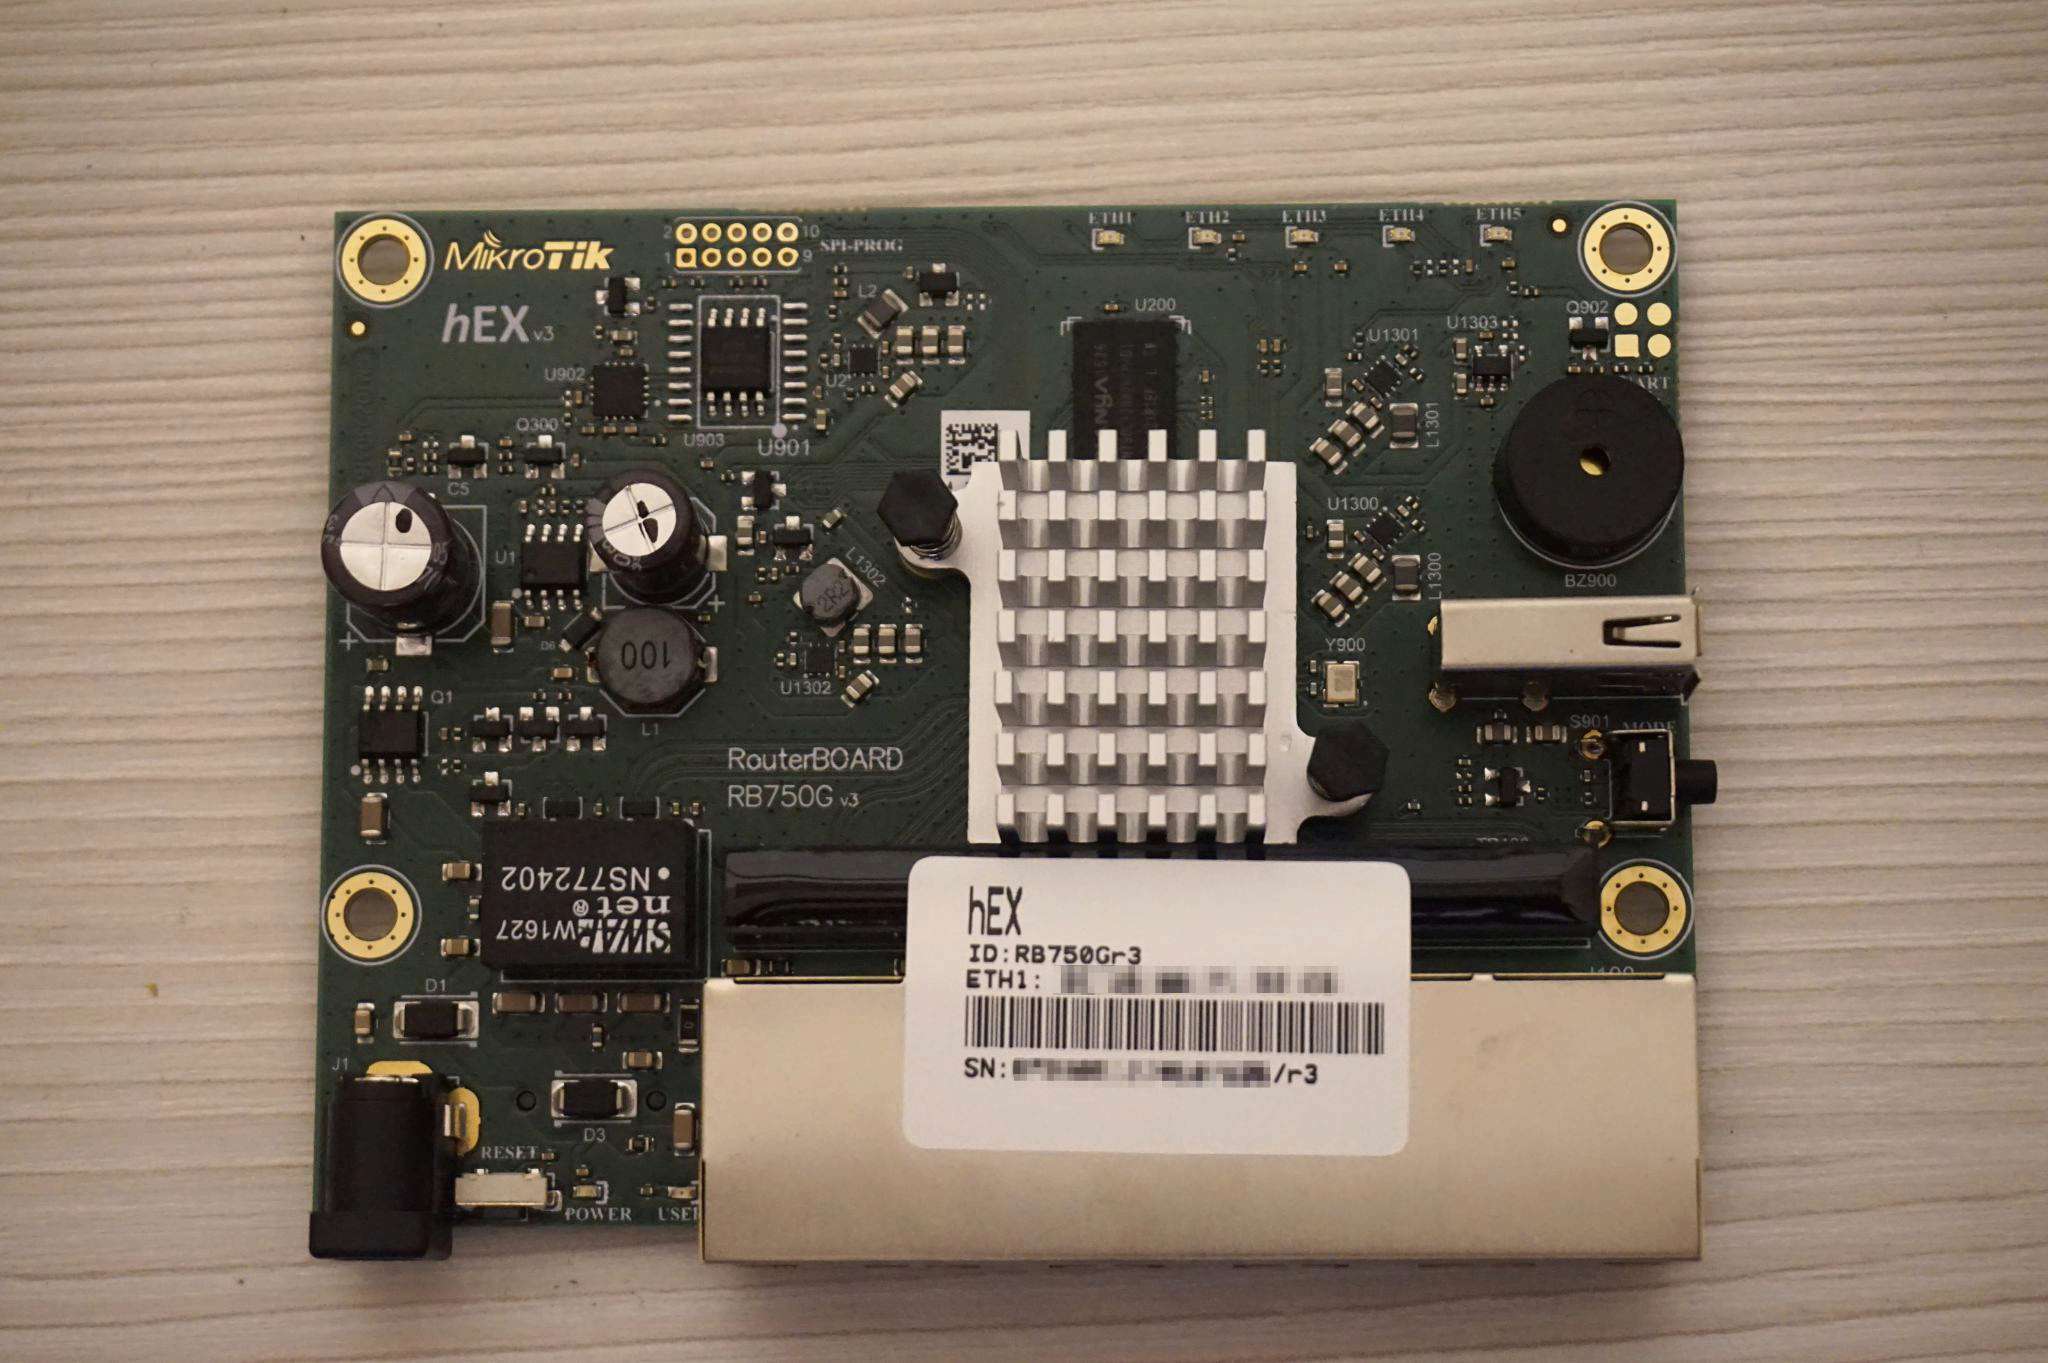 Mikrotik hex rb750gr3. Mikrotik 750gr3. Mikrotik rb750gr3. Mikrotik ROUTERBOARD rb750.